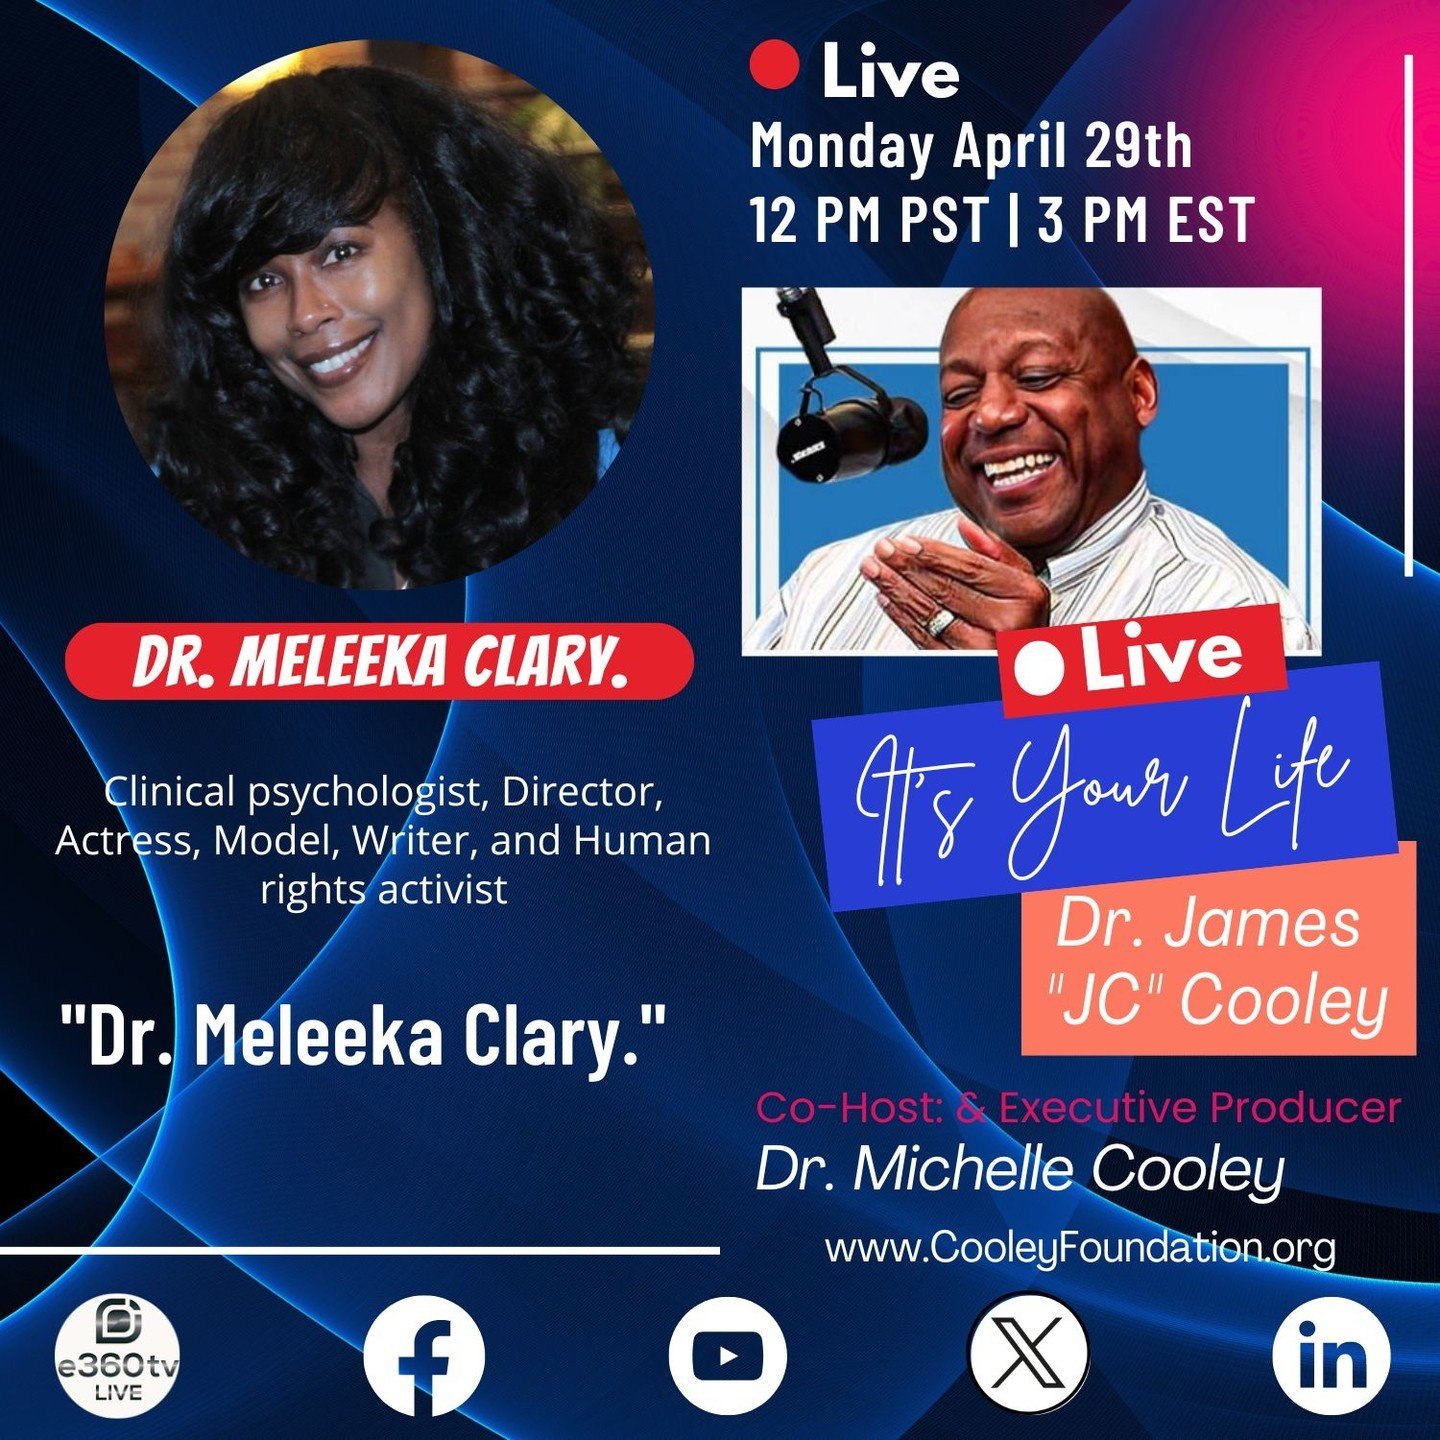 🎙️ Thrilled to have the incredible Dr. Meleeka Clary on #ItsYourLife as our special guest! We dive into her role as a clinical psychologist, her film &ldquo;The Three Corners of Deception,&rdquo; and her own podcast. Such an inspiring, multi-talente